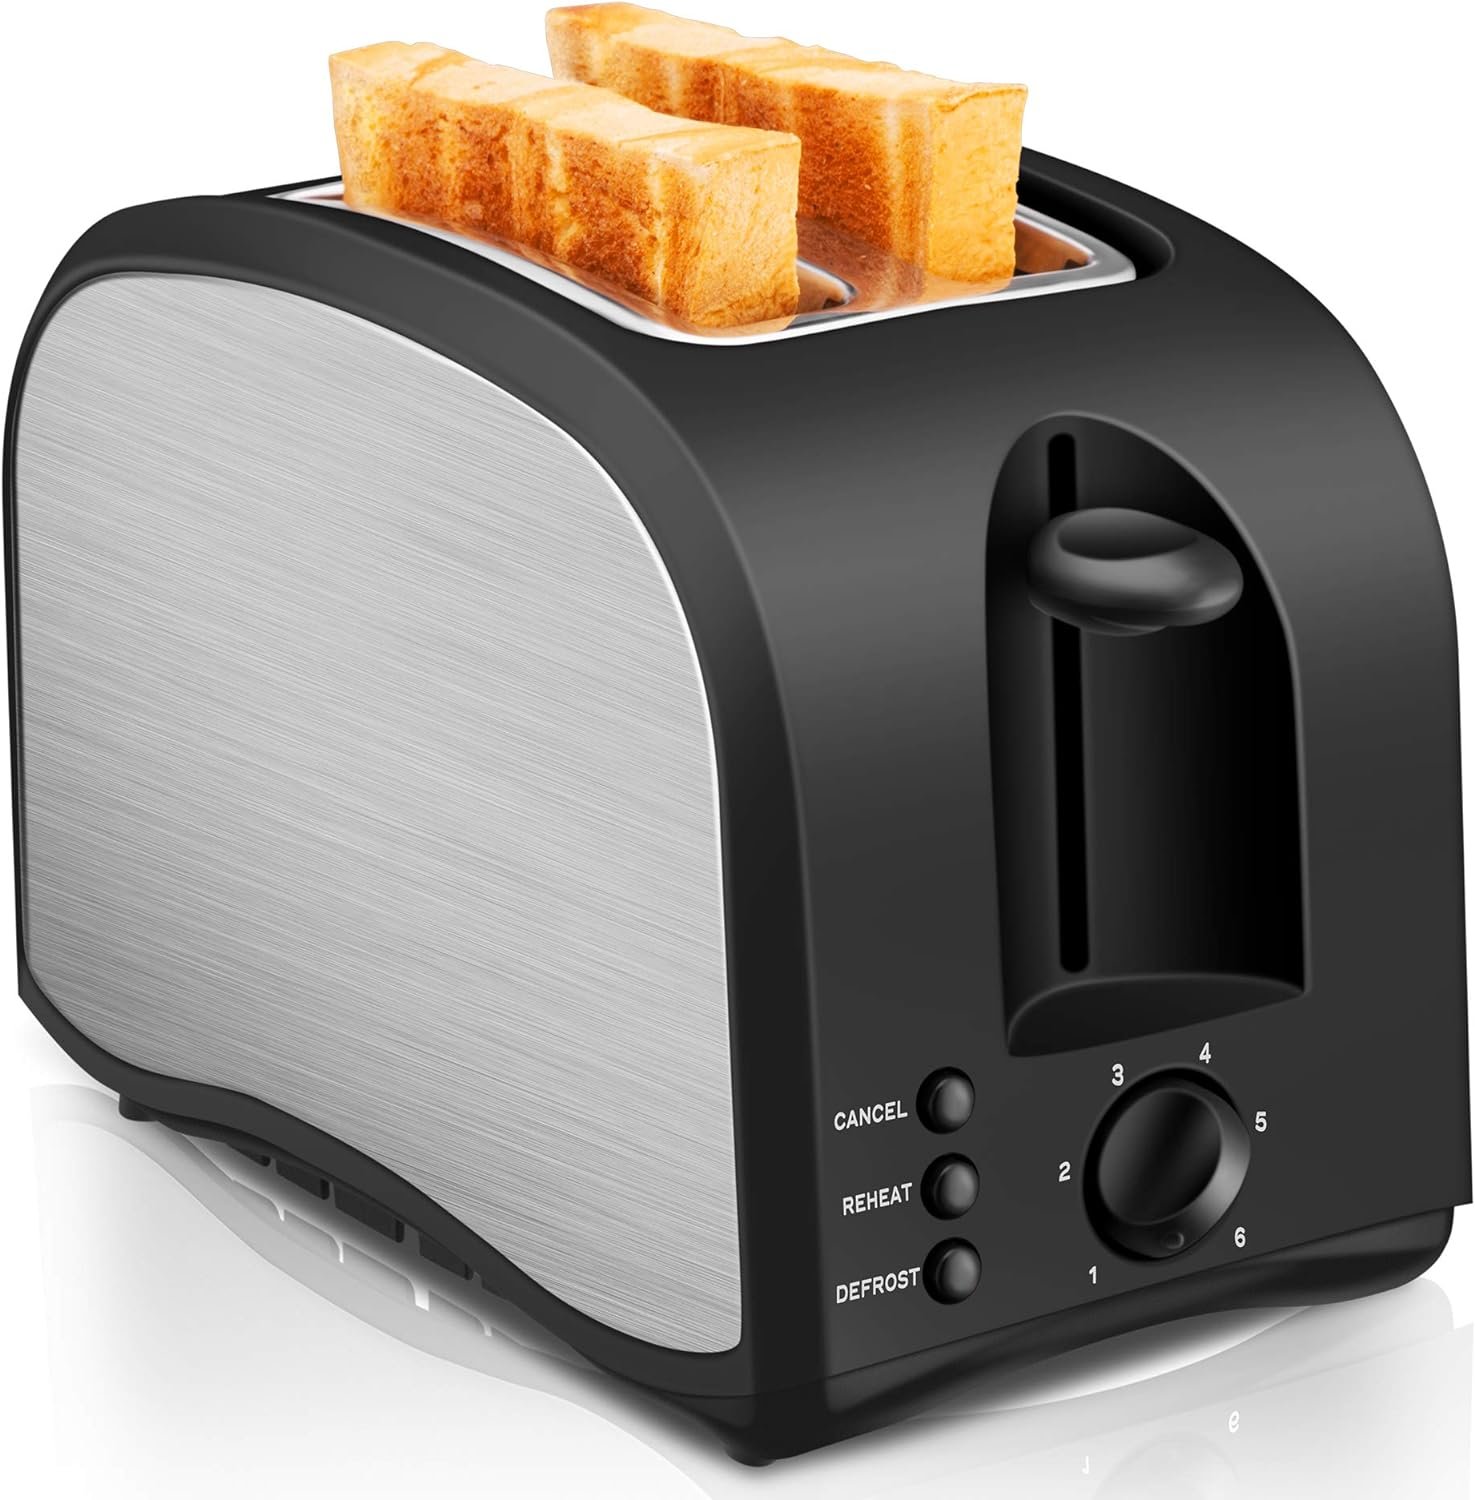 2 Slice Toaster CUSINAID Black Wide Slot Toaster 2 Slice Best Rated Prime with Pop Up Reheat Defrost Functions, 6-Shade Control, Removable Crumb Tray